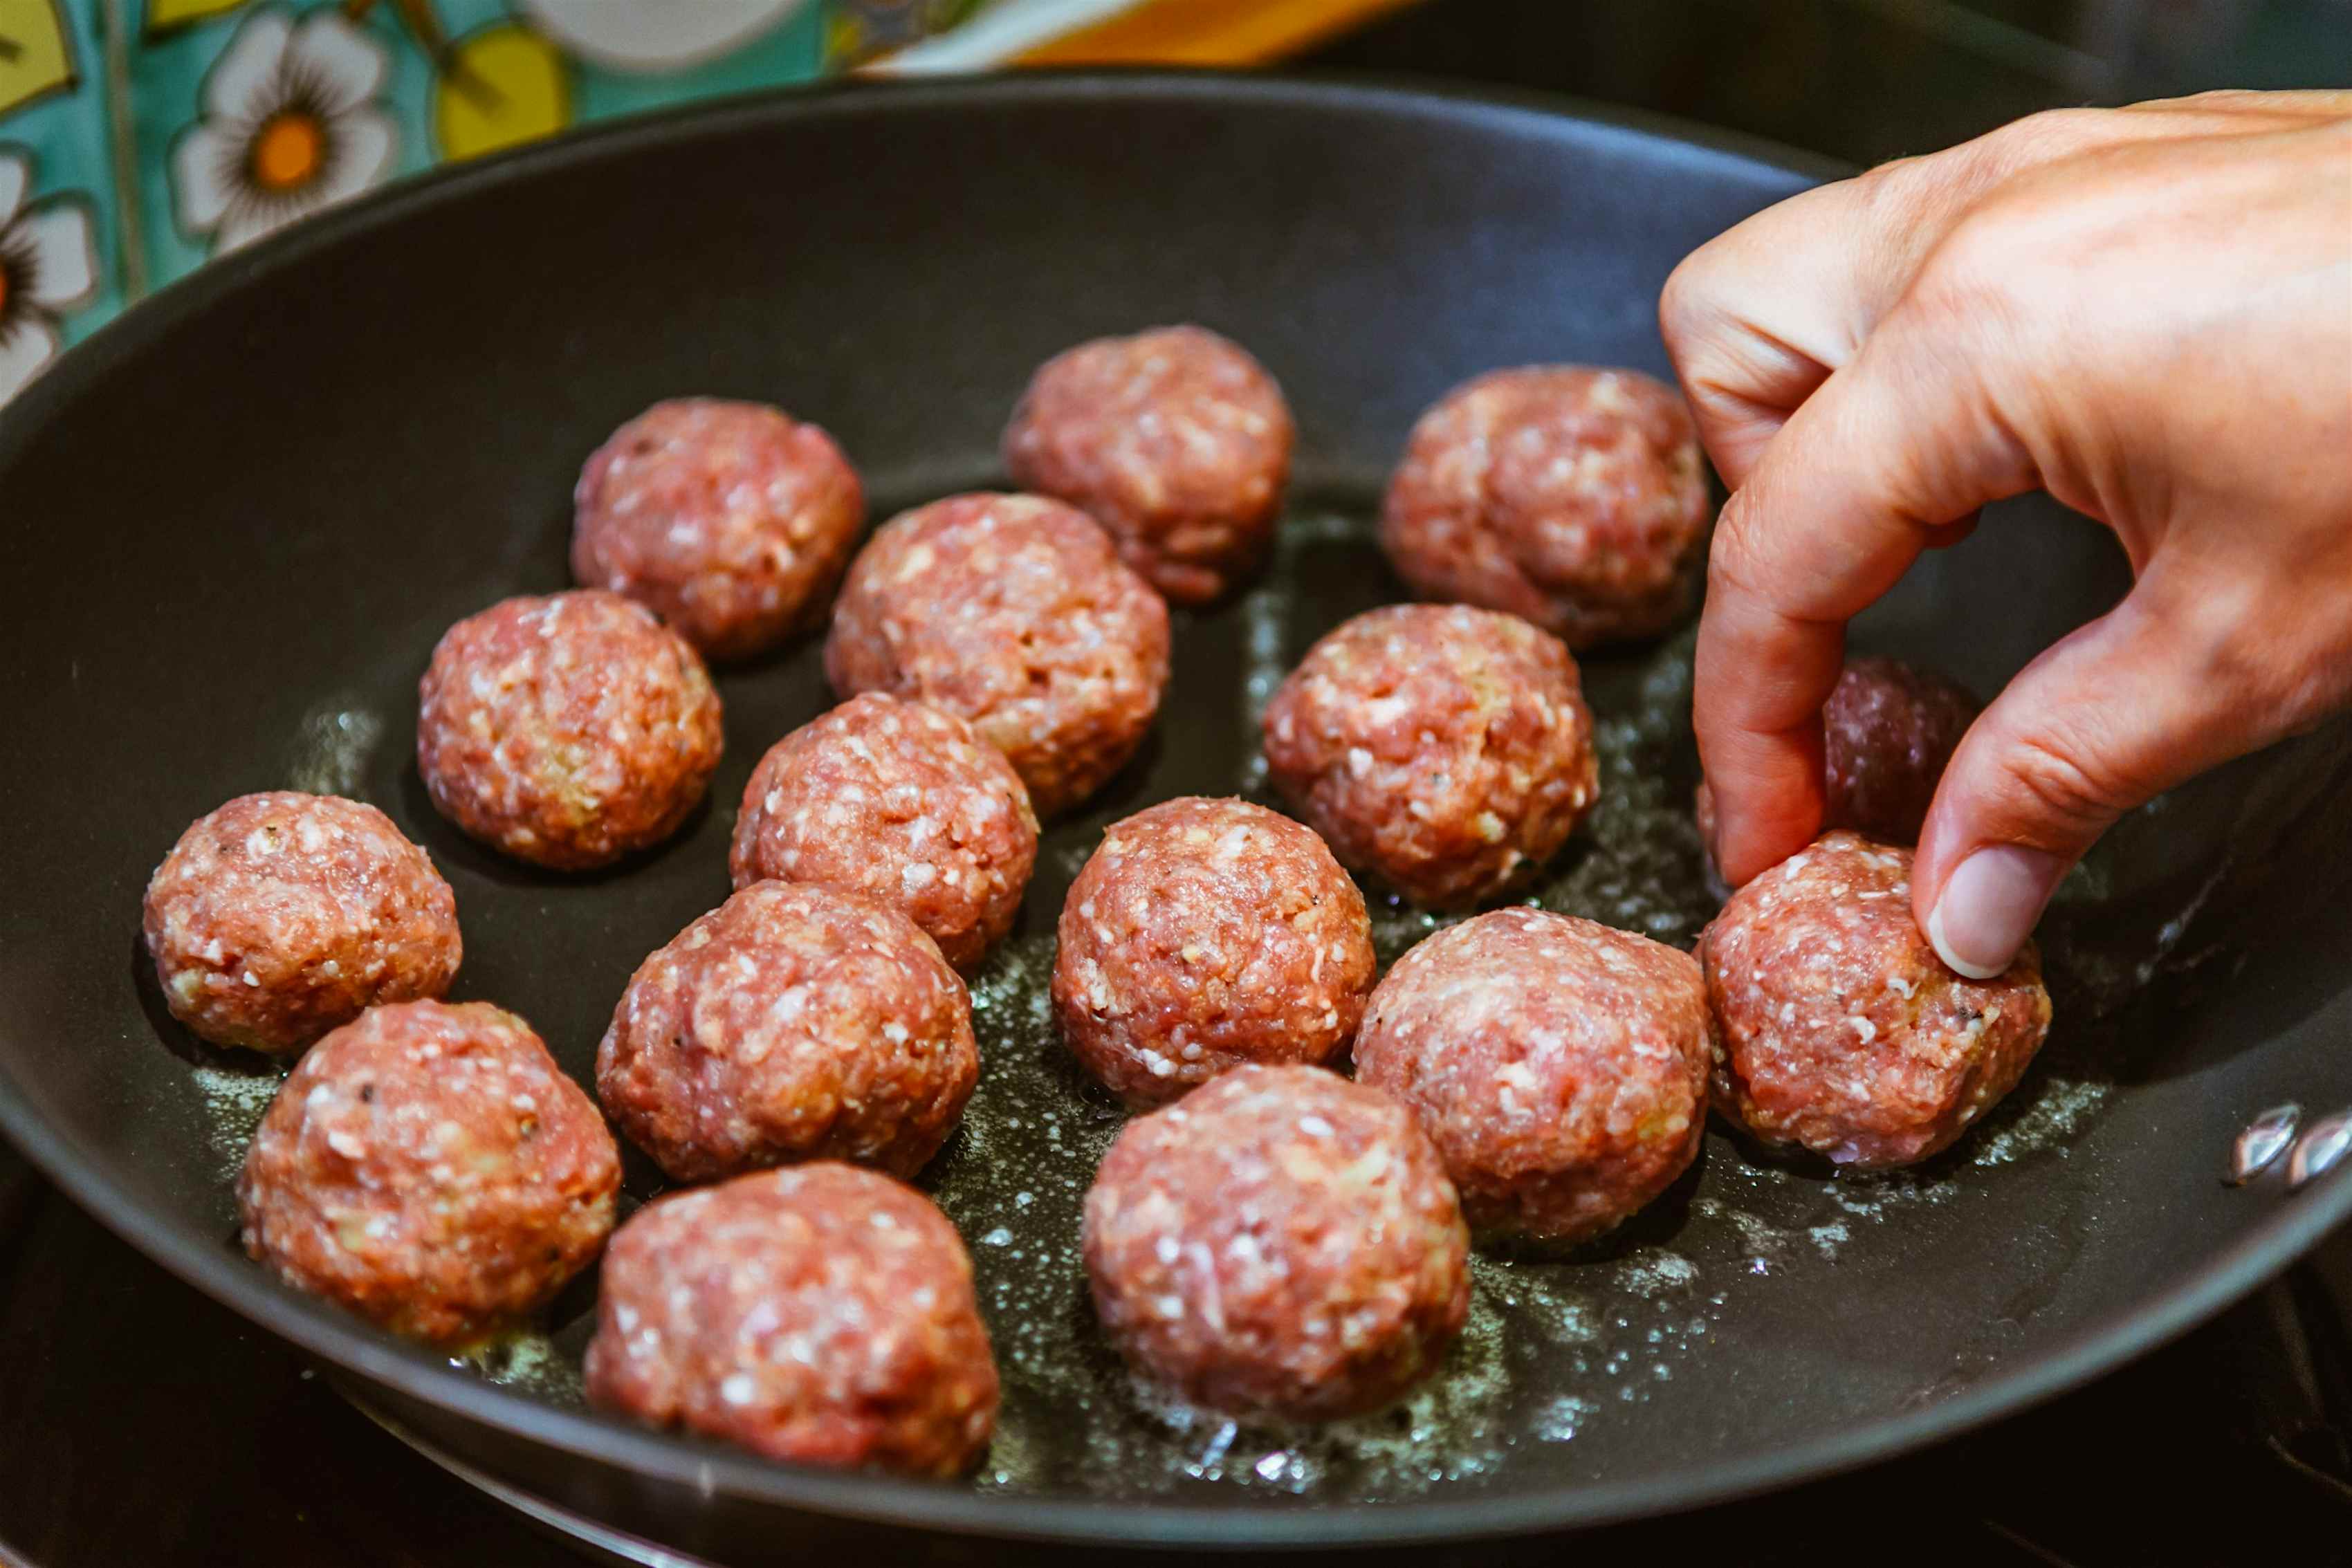 Ikea Has Released Its Famous Swedish Meatball Recipe So You Can Make